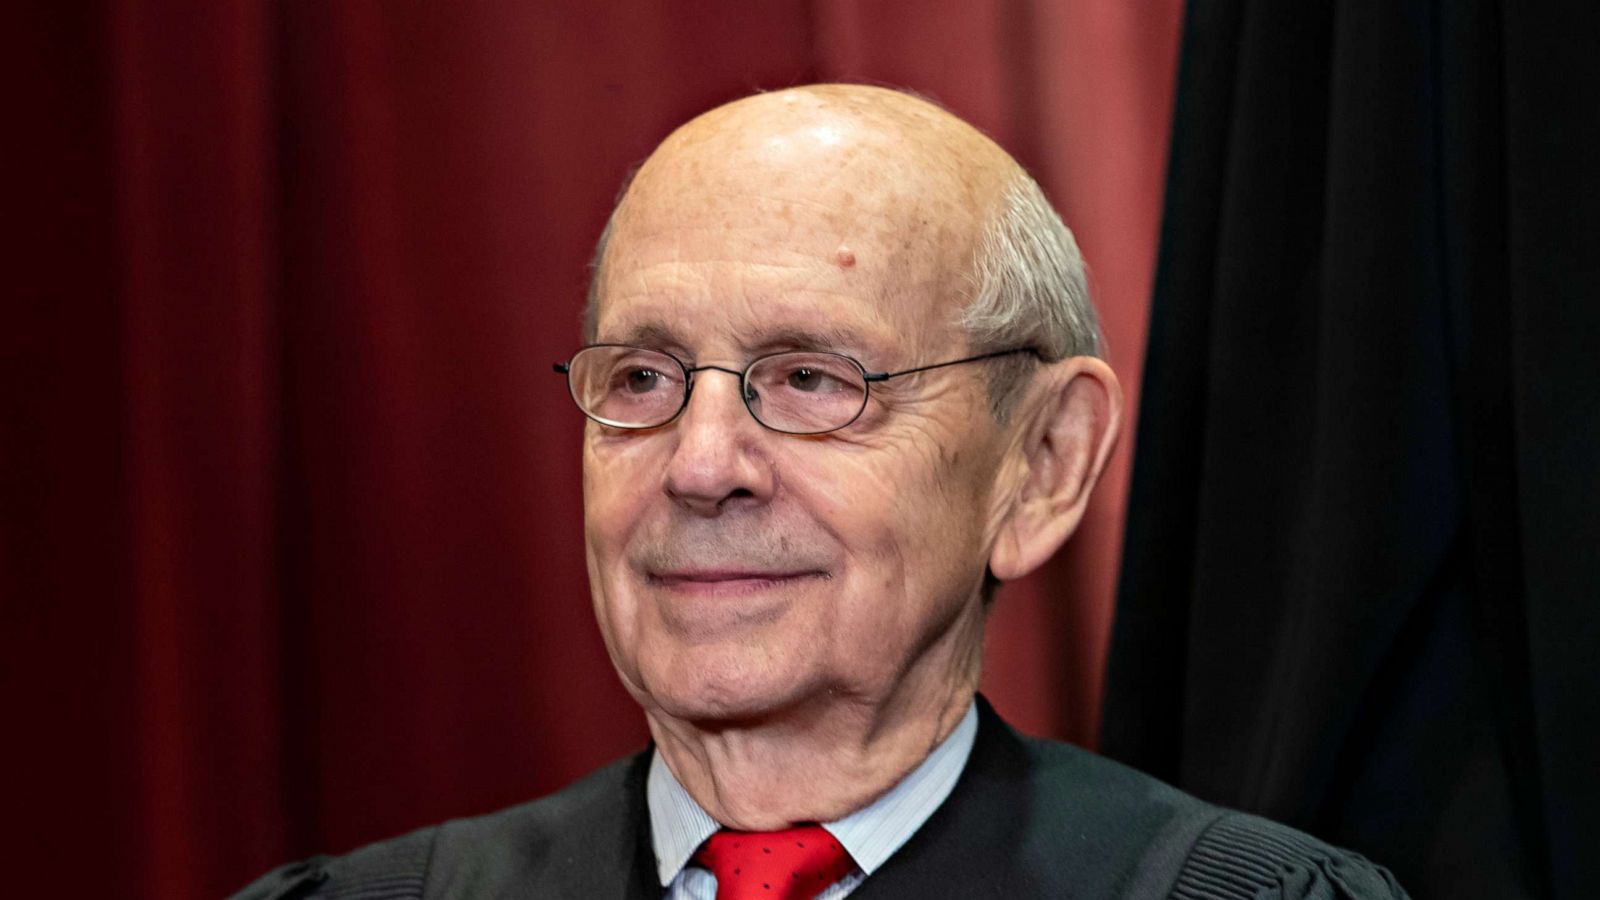 Supreme Court Justice Stephen Breyer to retire at end of term - ABC News